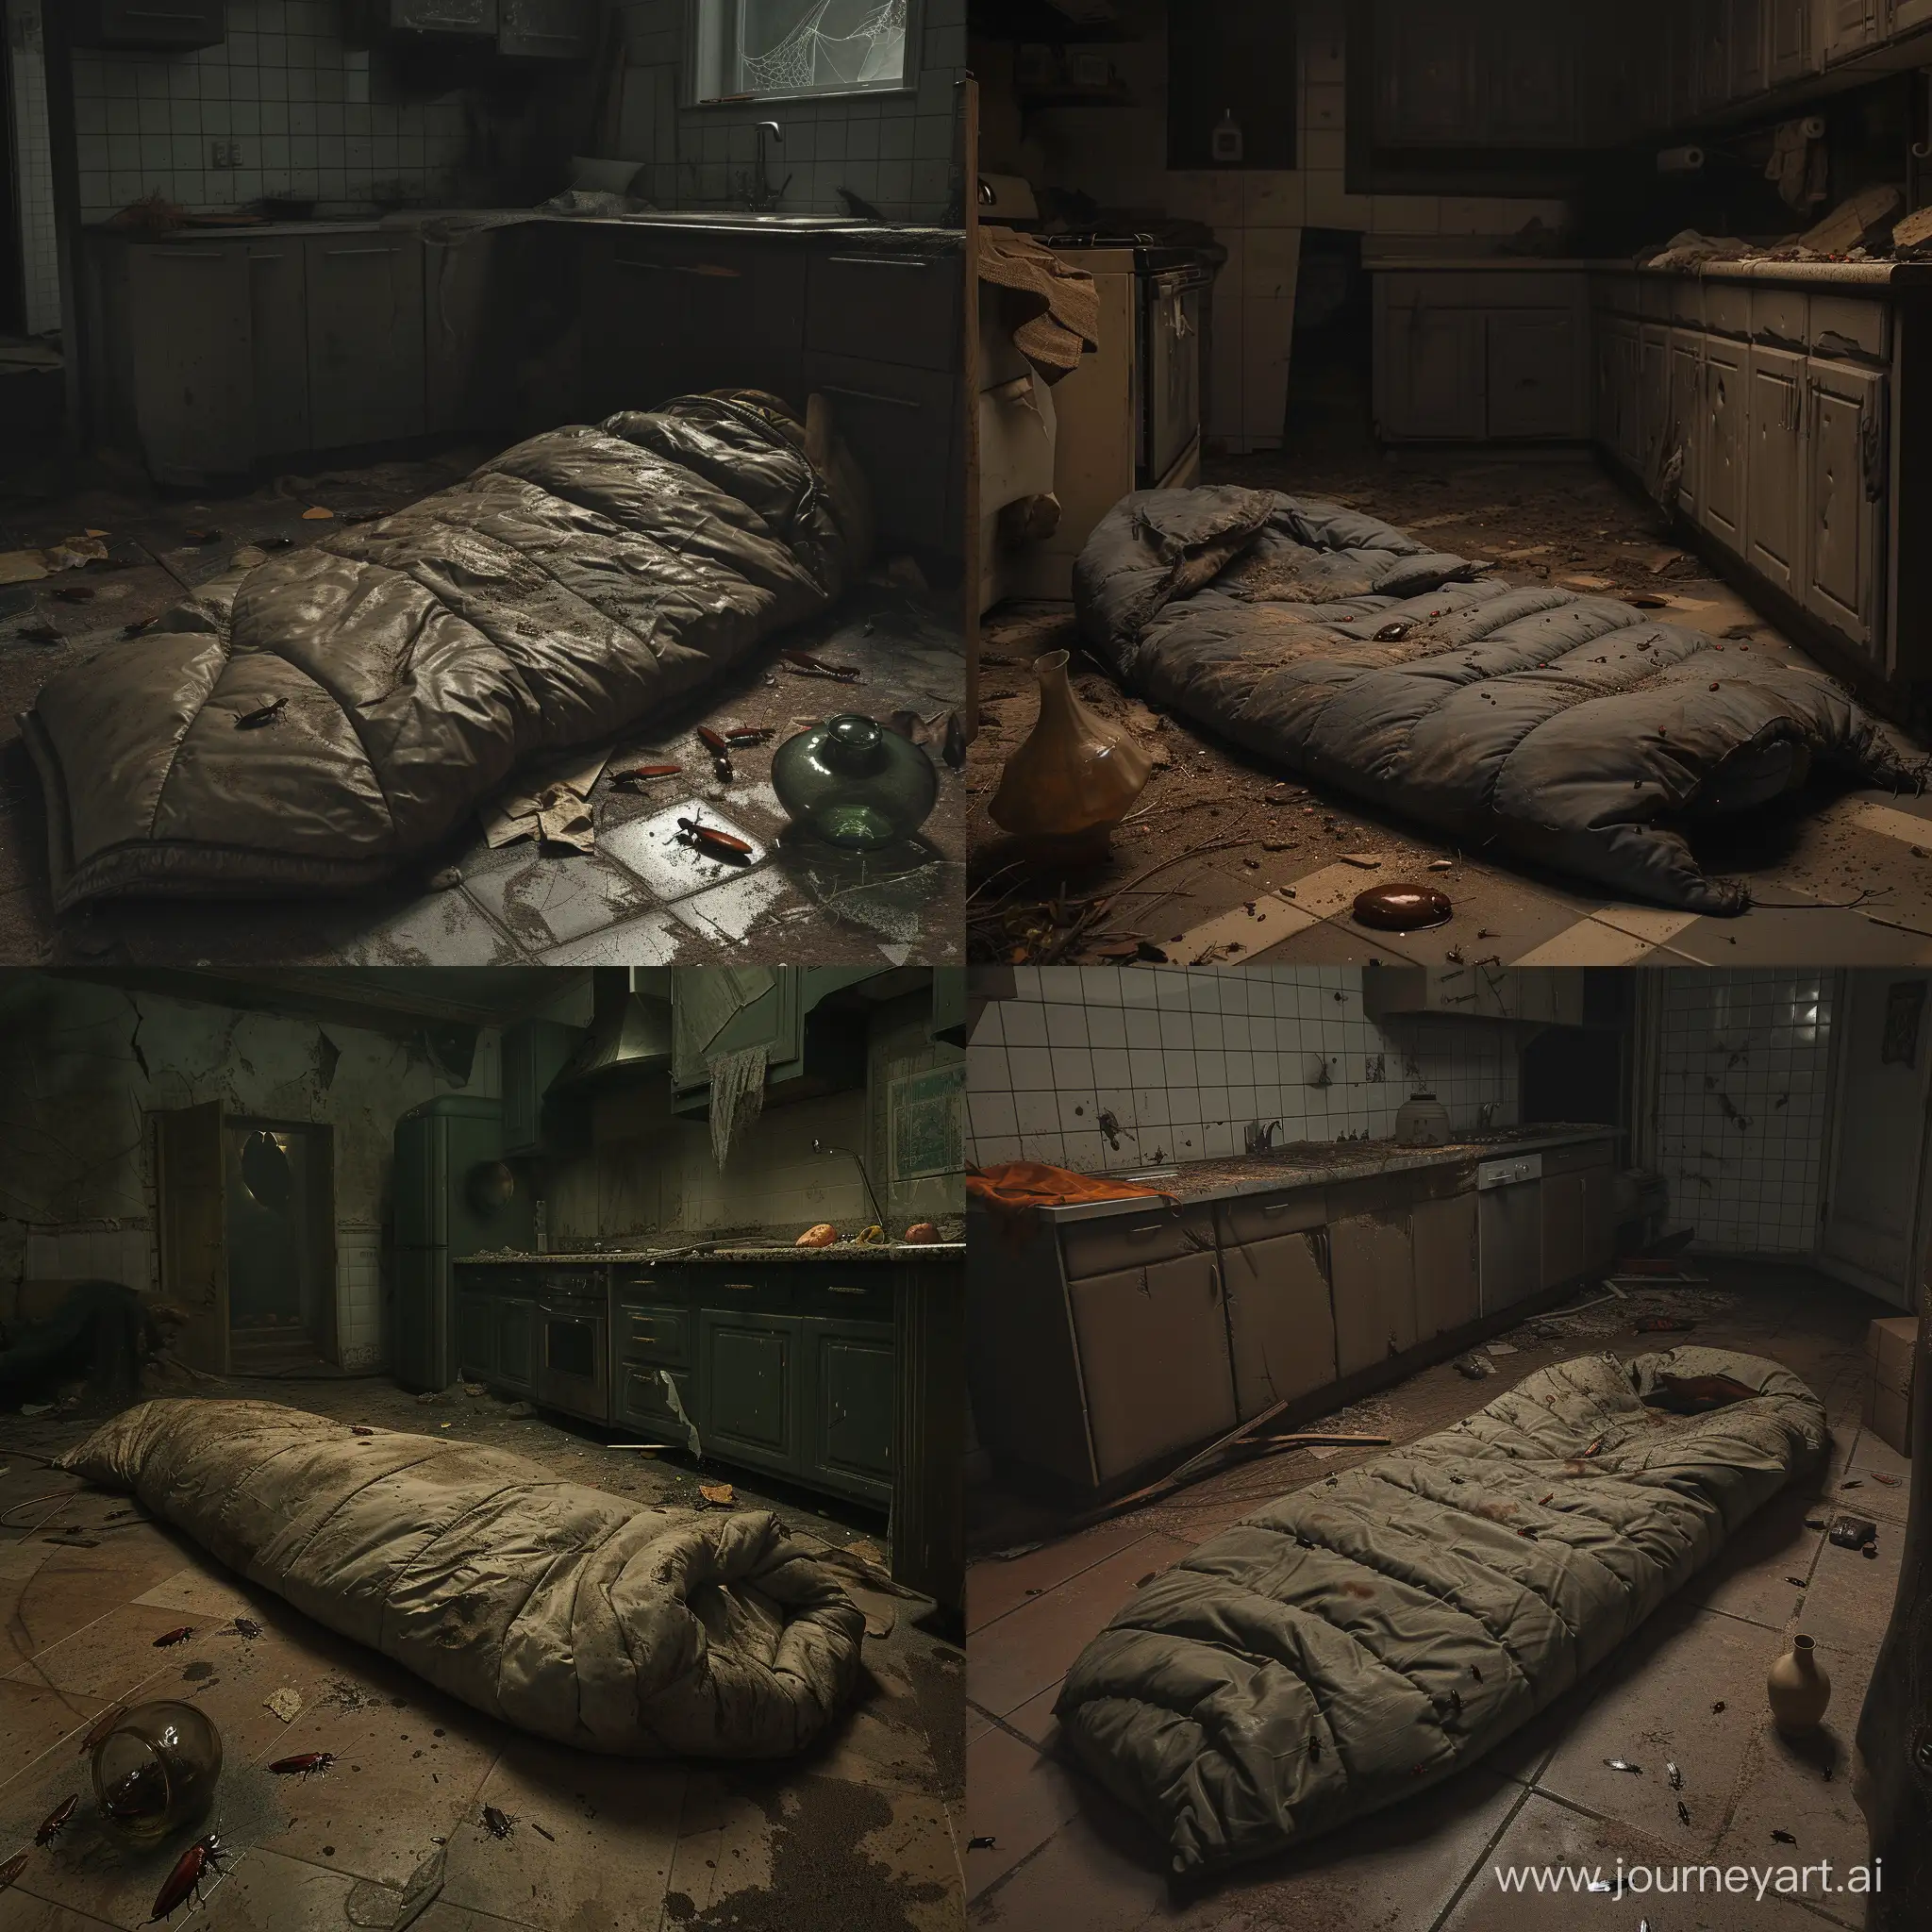 A beat-up sleeping bag laying on the floor in the very dark and messy kitchen. It is night. There is no light at all in the room. There are a few cockroaches and other insects running near the sleeping bag. There is a broken vase near the sleeping bag. The room looks like location from "Silent Hill" videogame